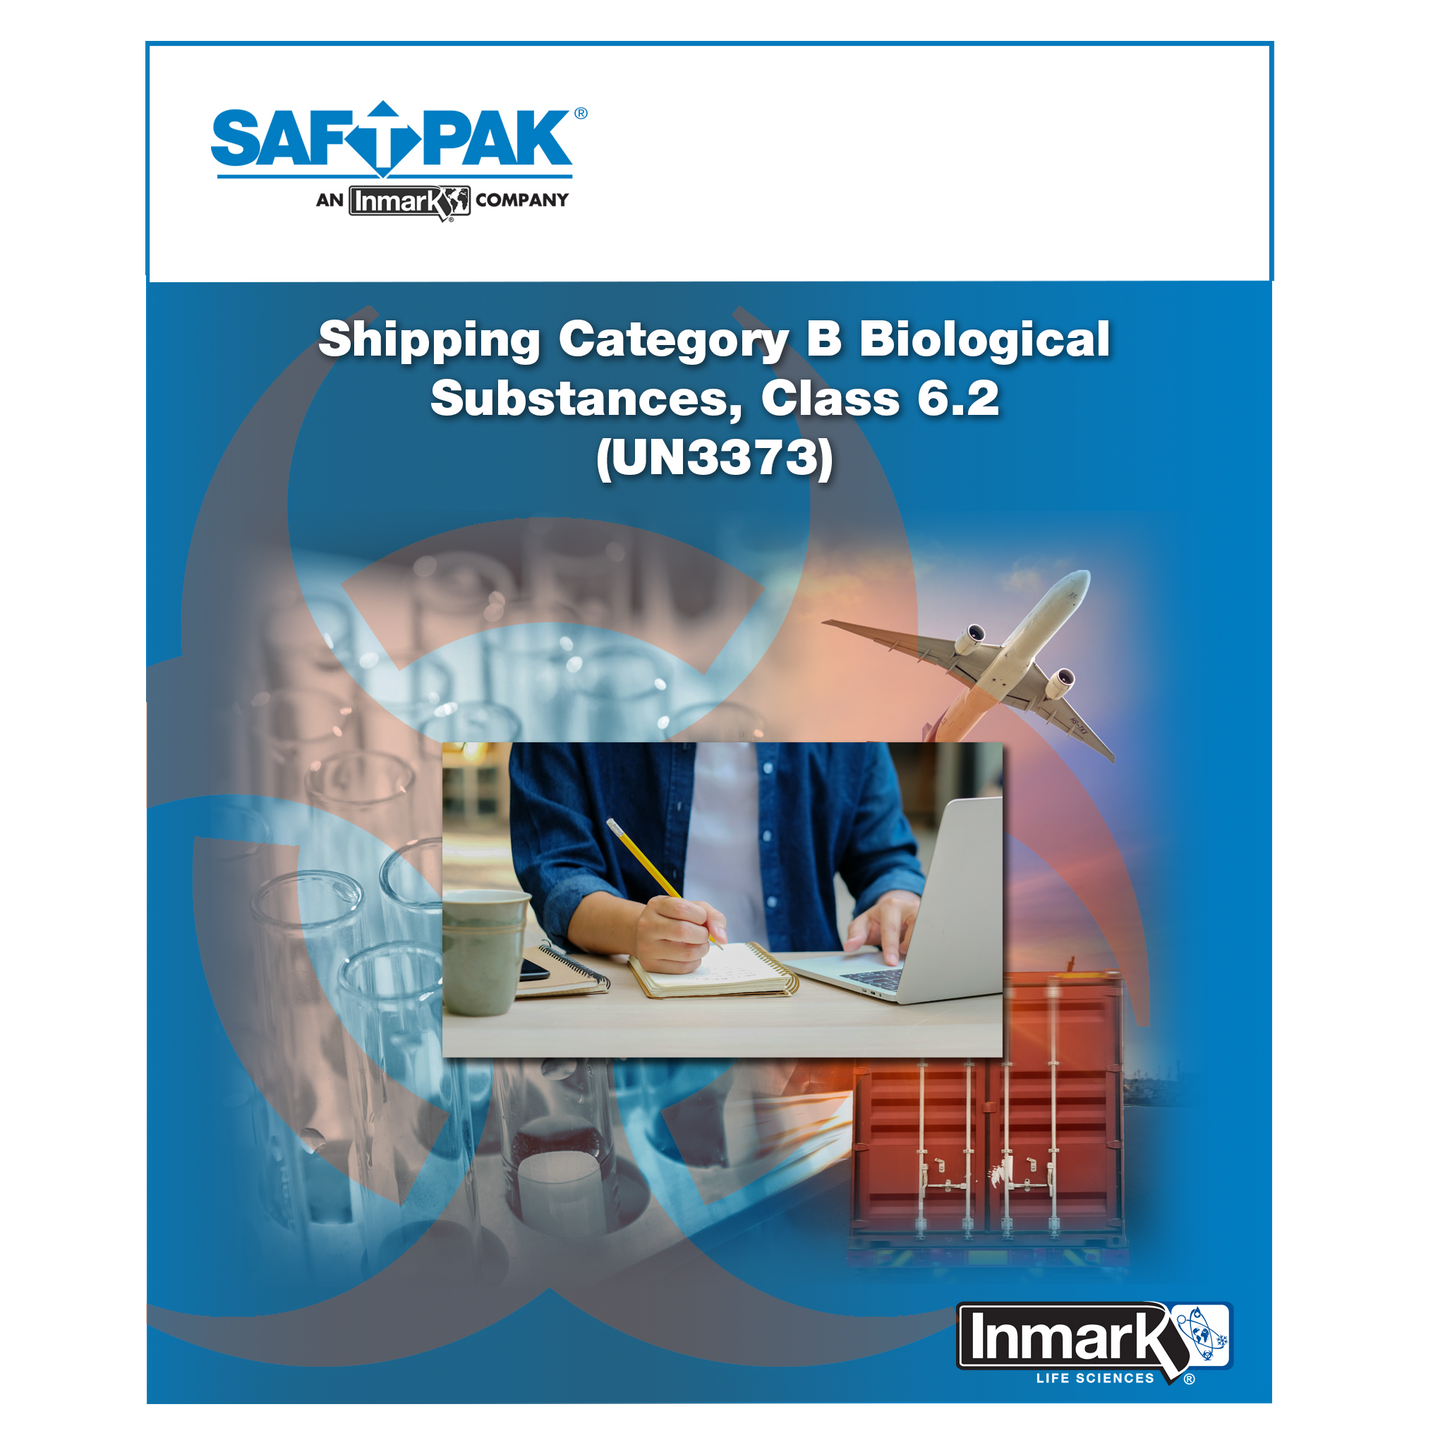 ShippingCategory-B Infectious Substances Training